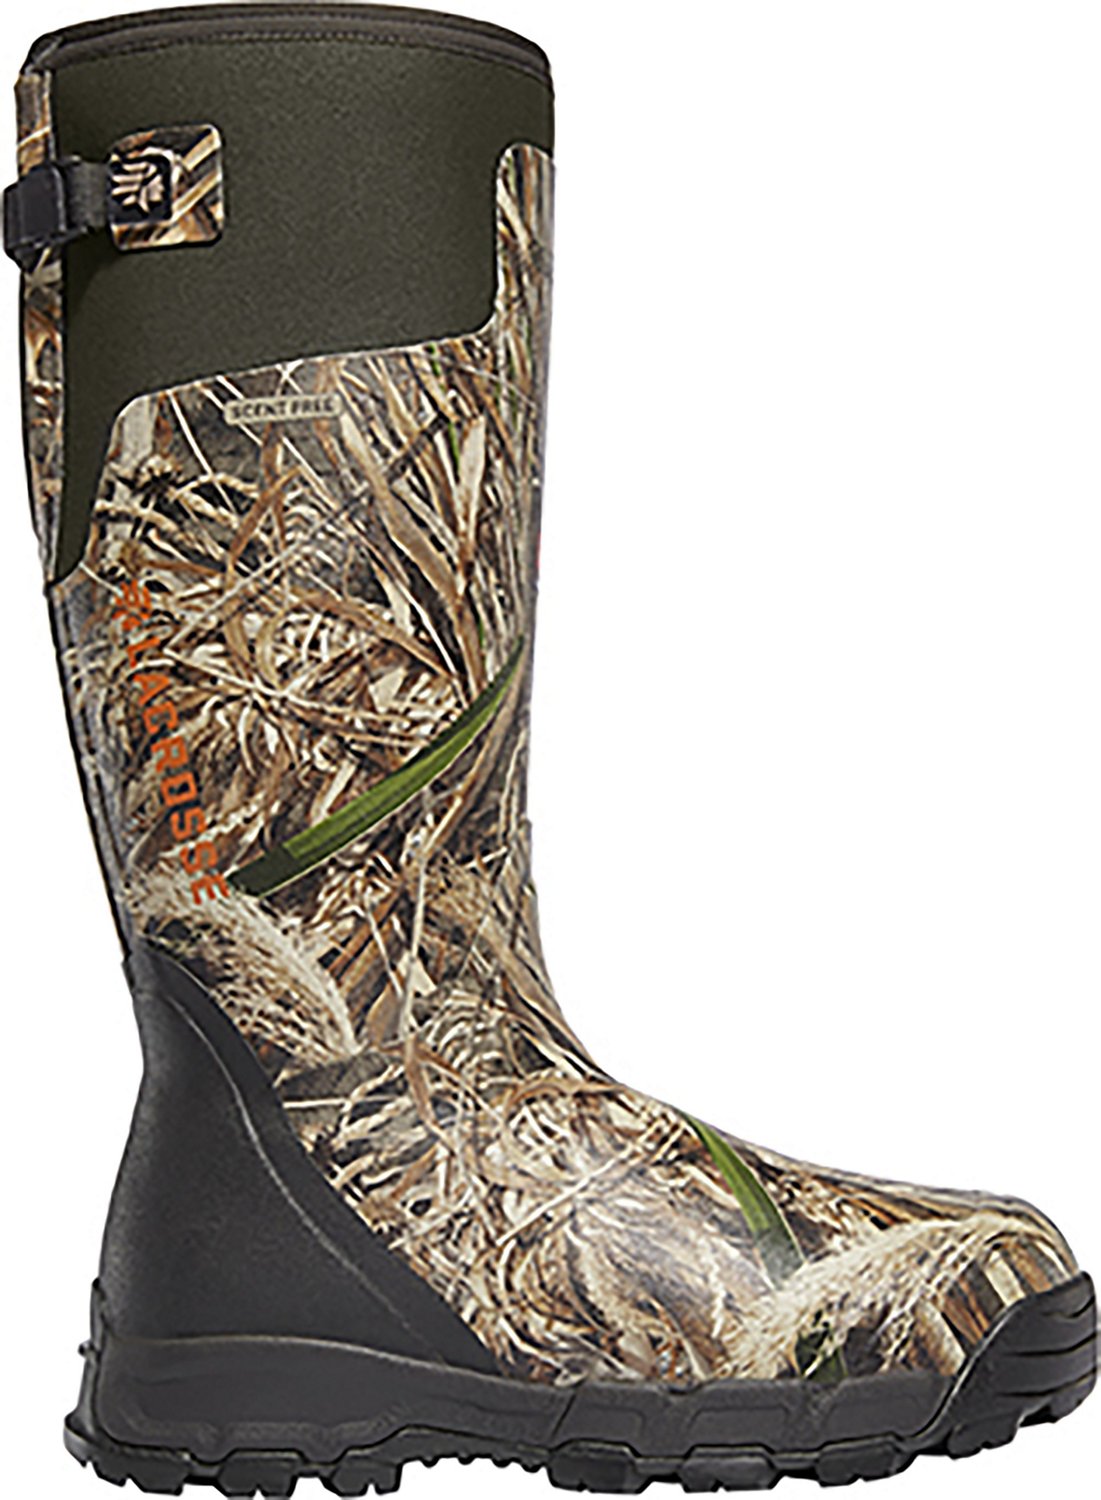 LaCrosse Men's Alphaburly Pro 18 in Hunting Boots | Academy